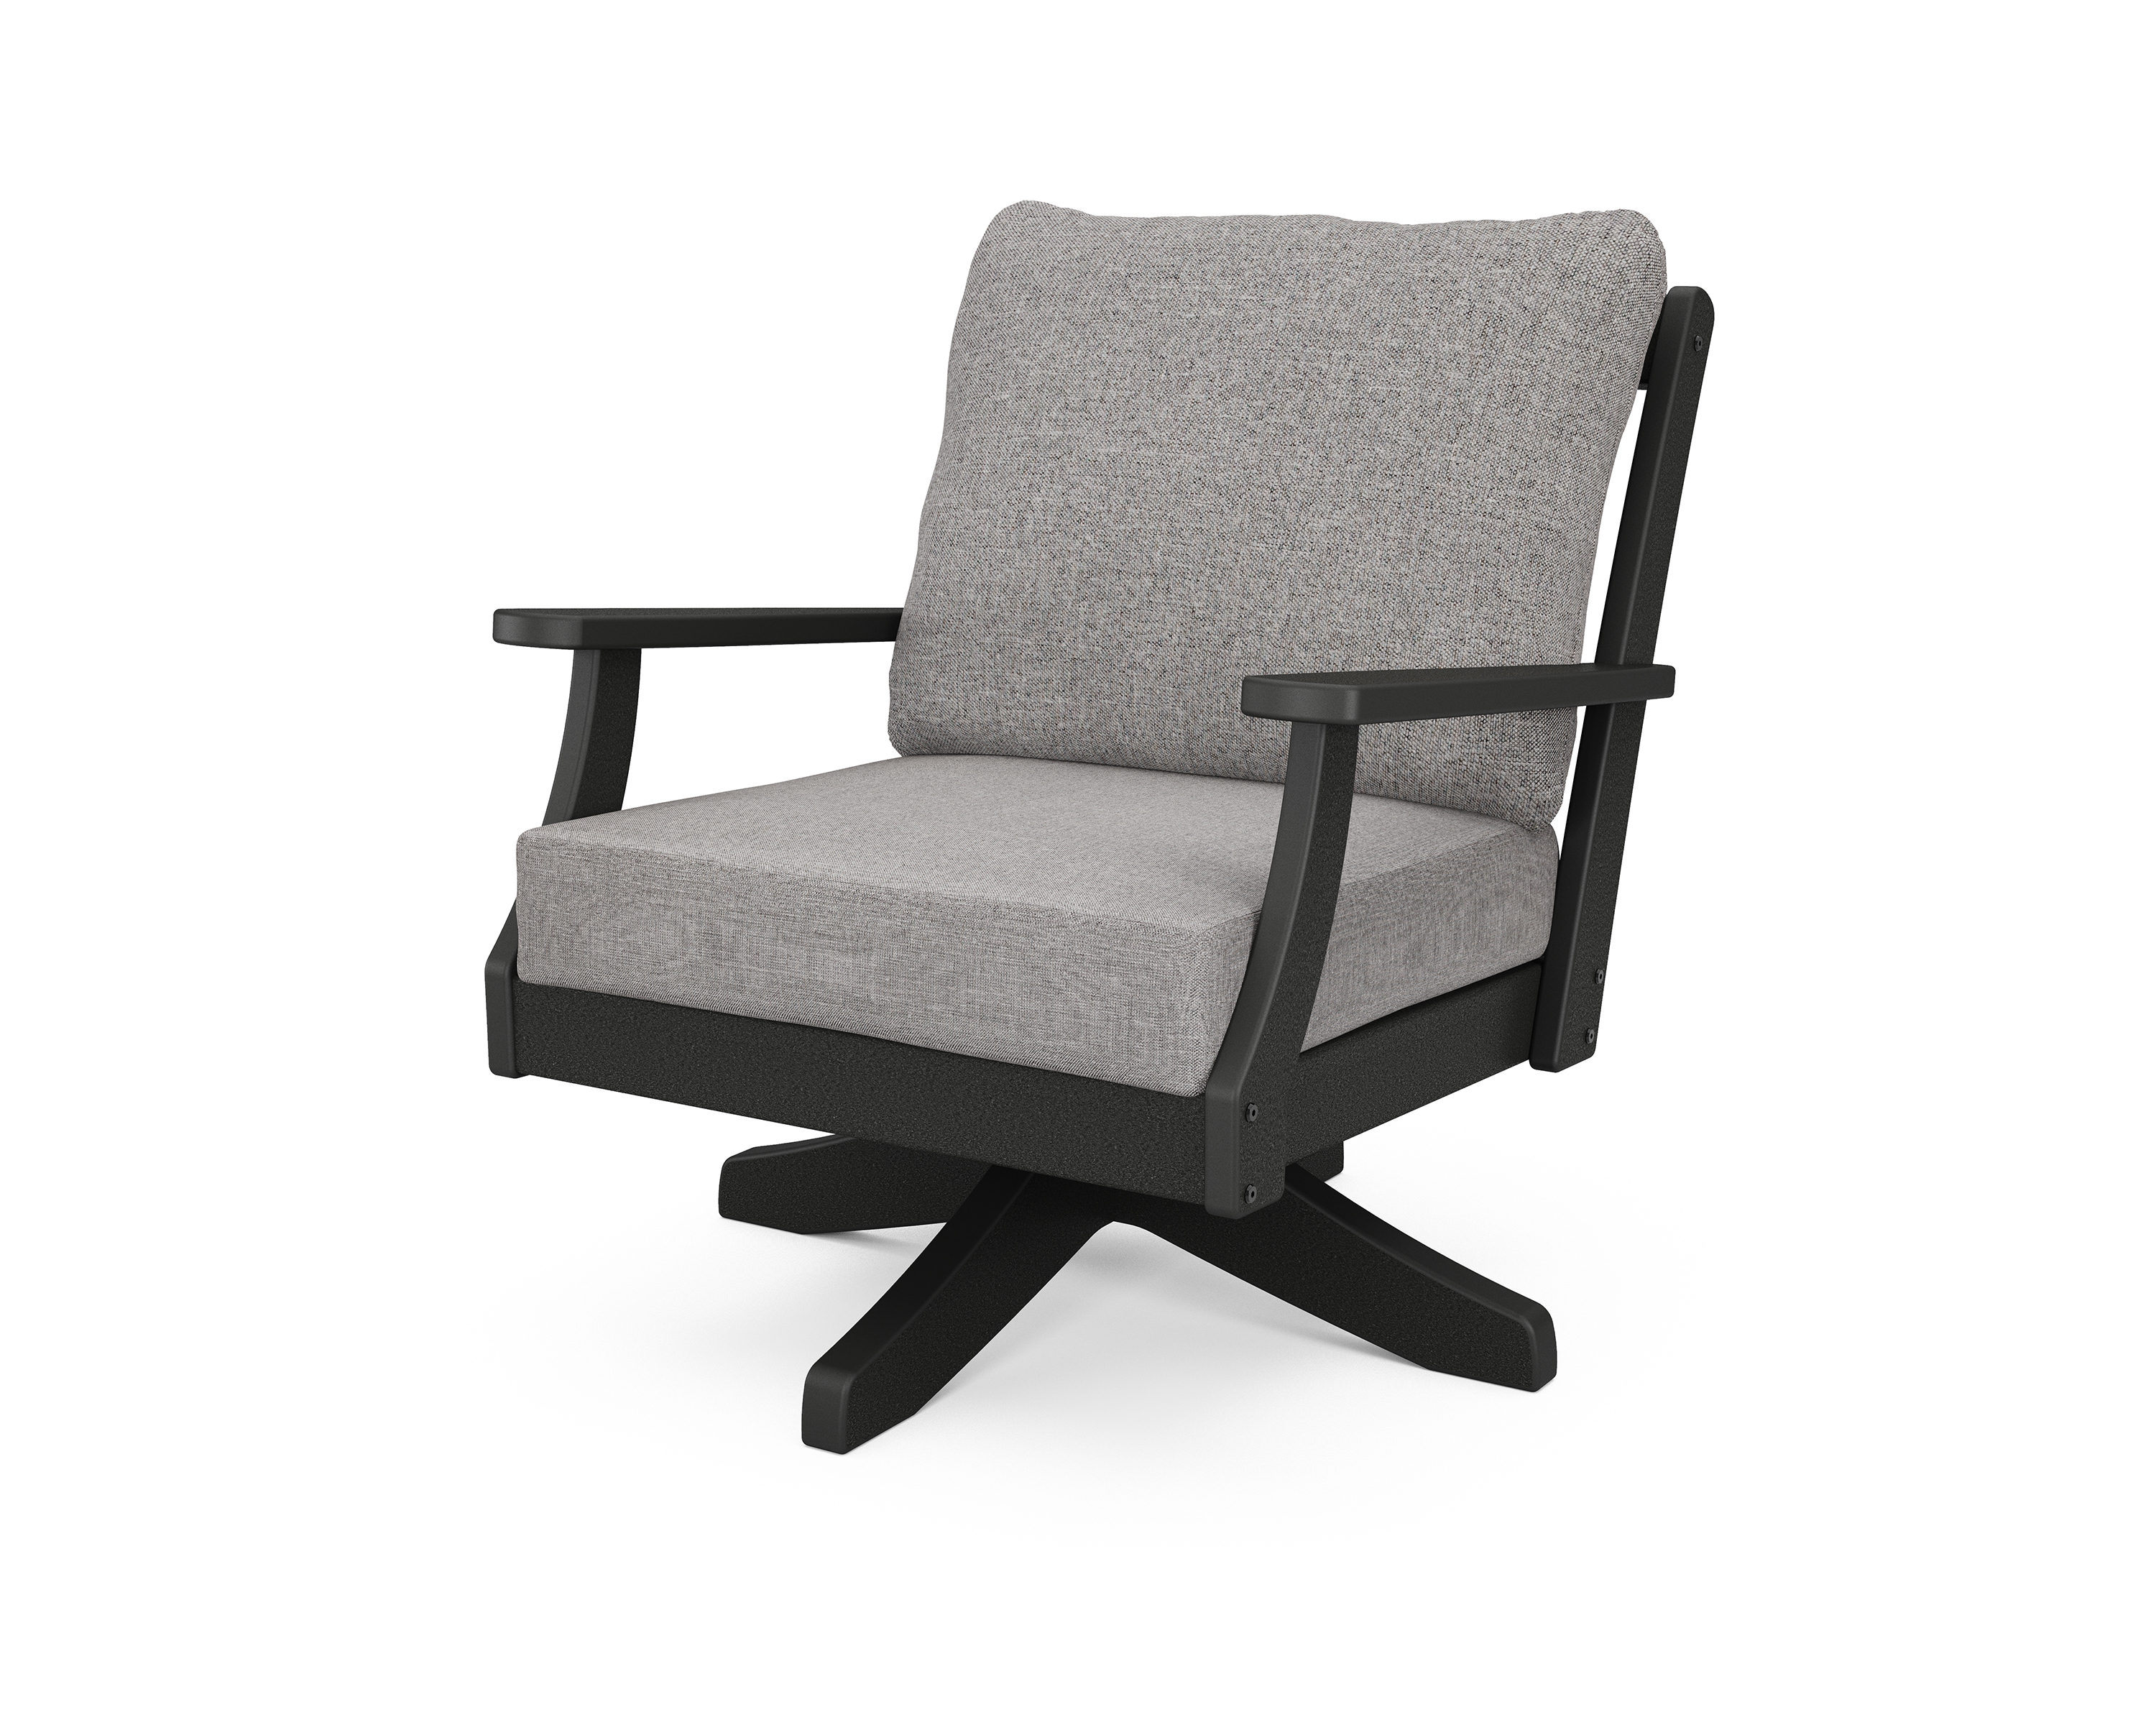 braxton deep seating swivel chair in black / grey mist product image